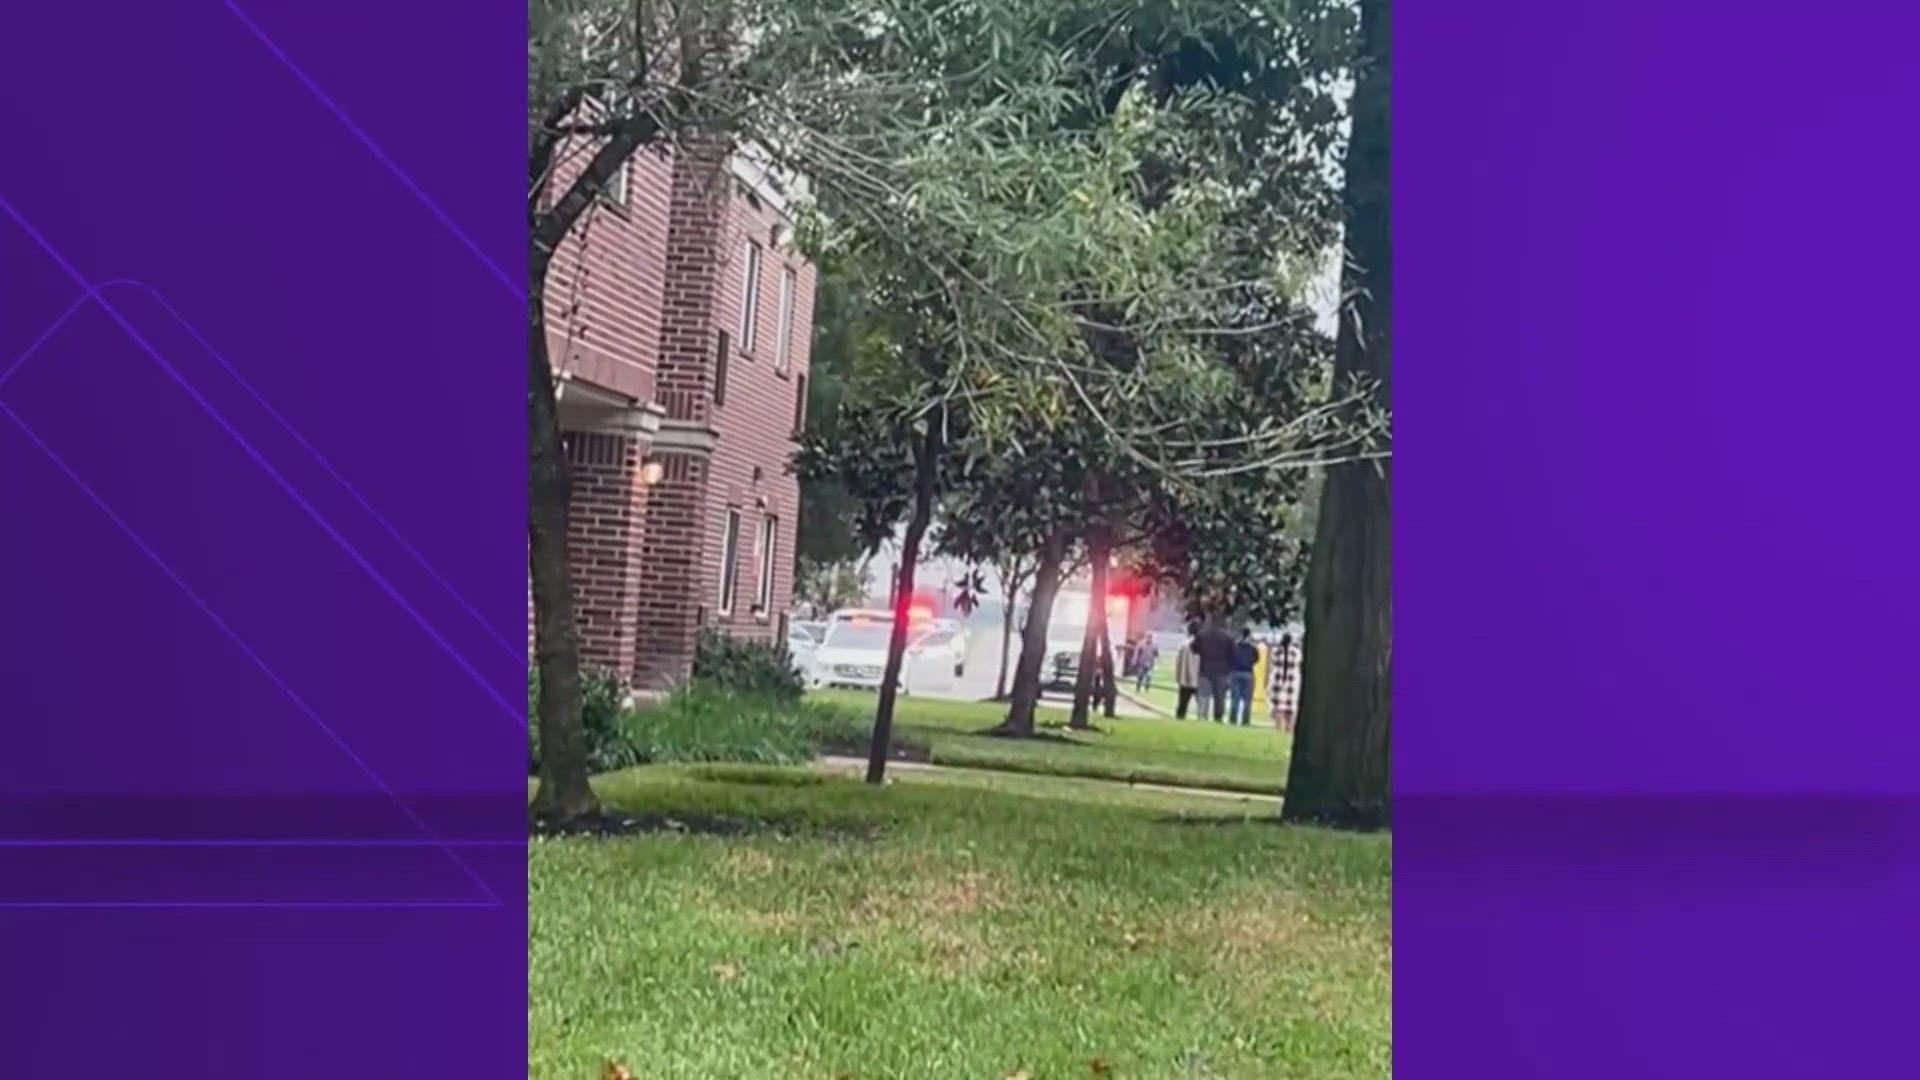 No students were injured in the PVAMU shooting in Waller County. Classes were canceled after the incident around 9:30 a.m. Monday.